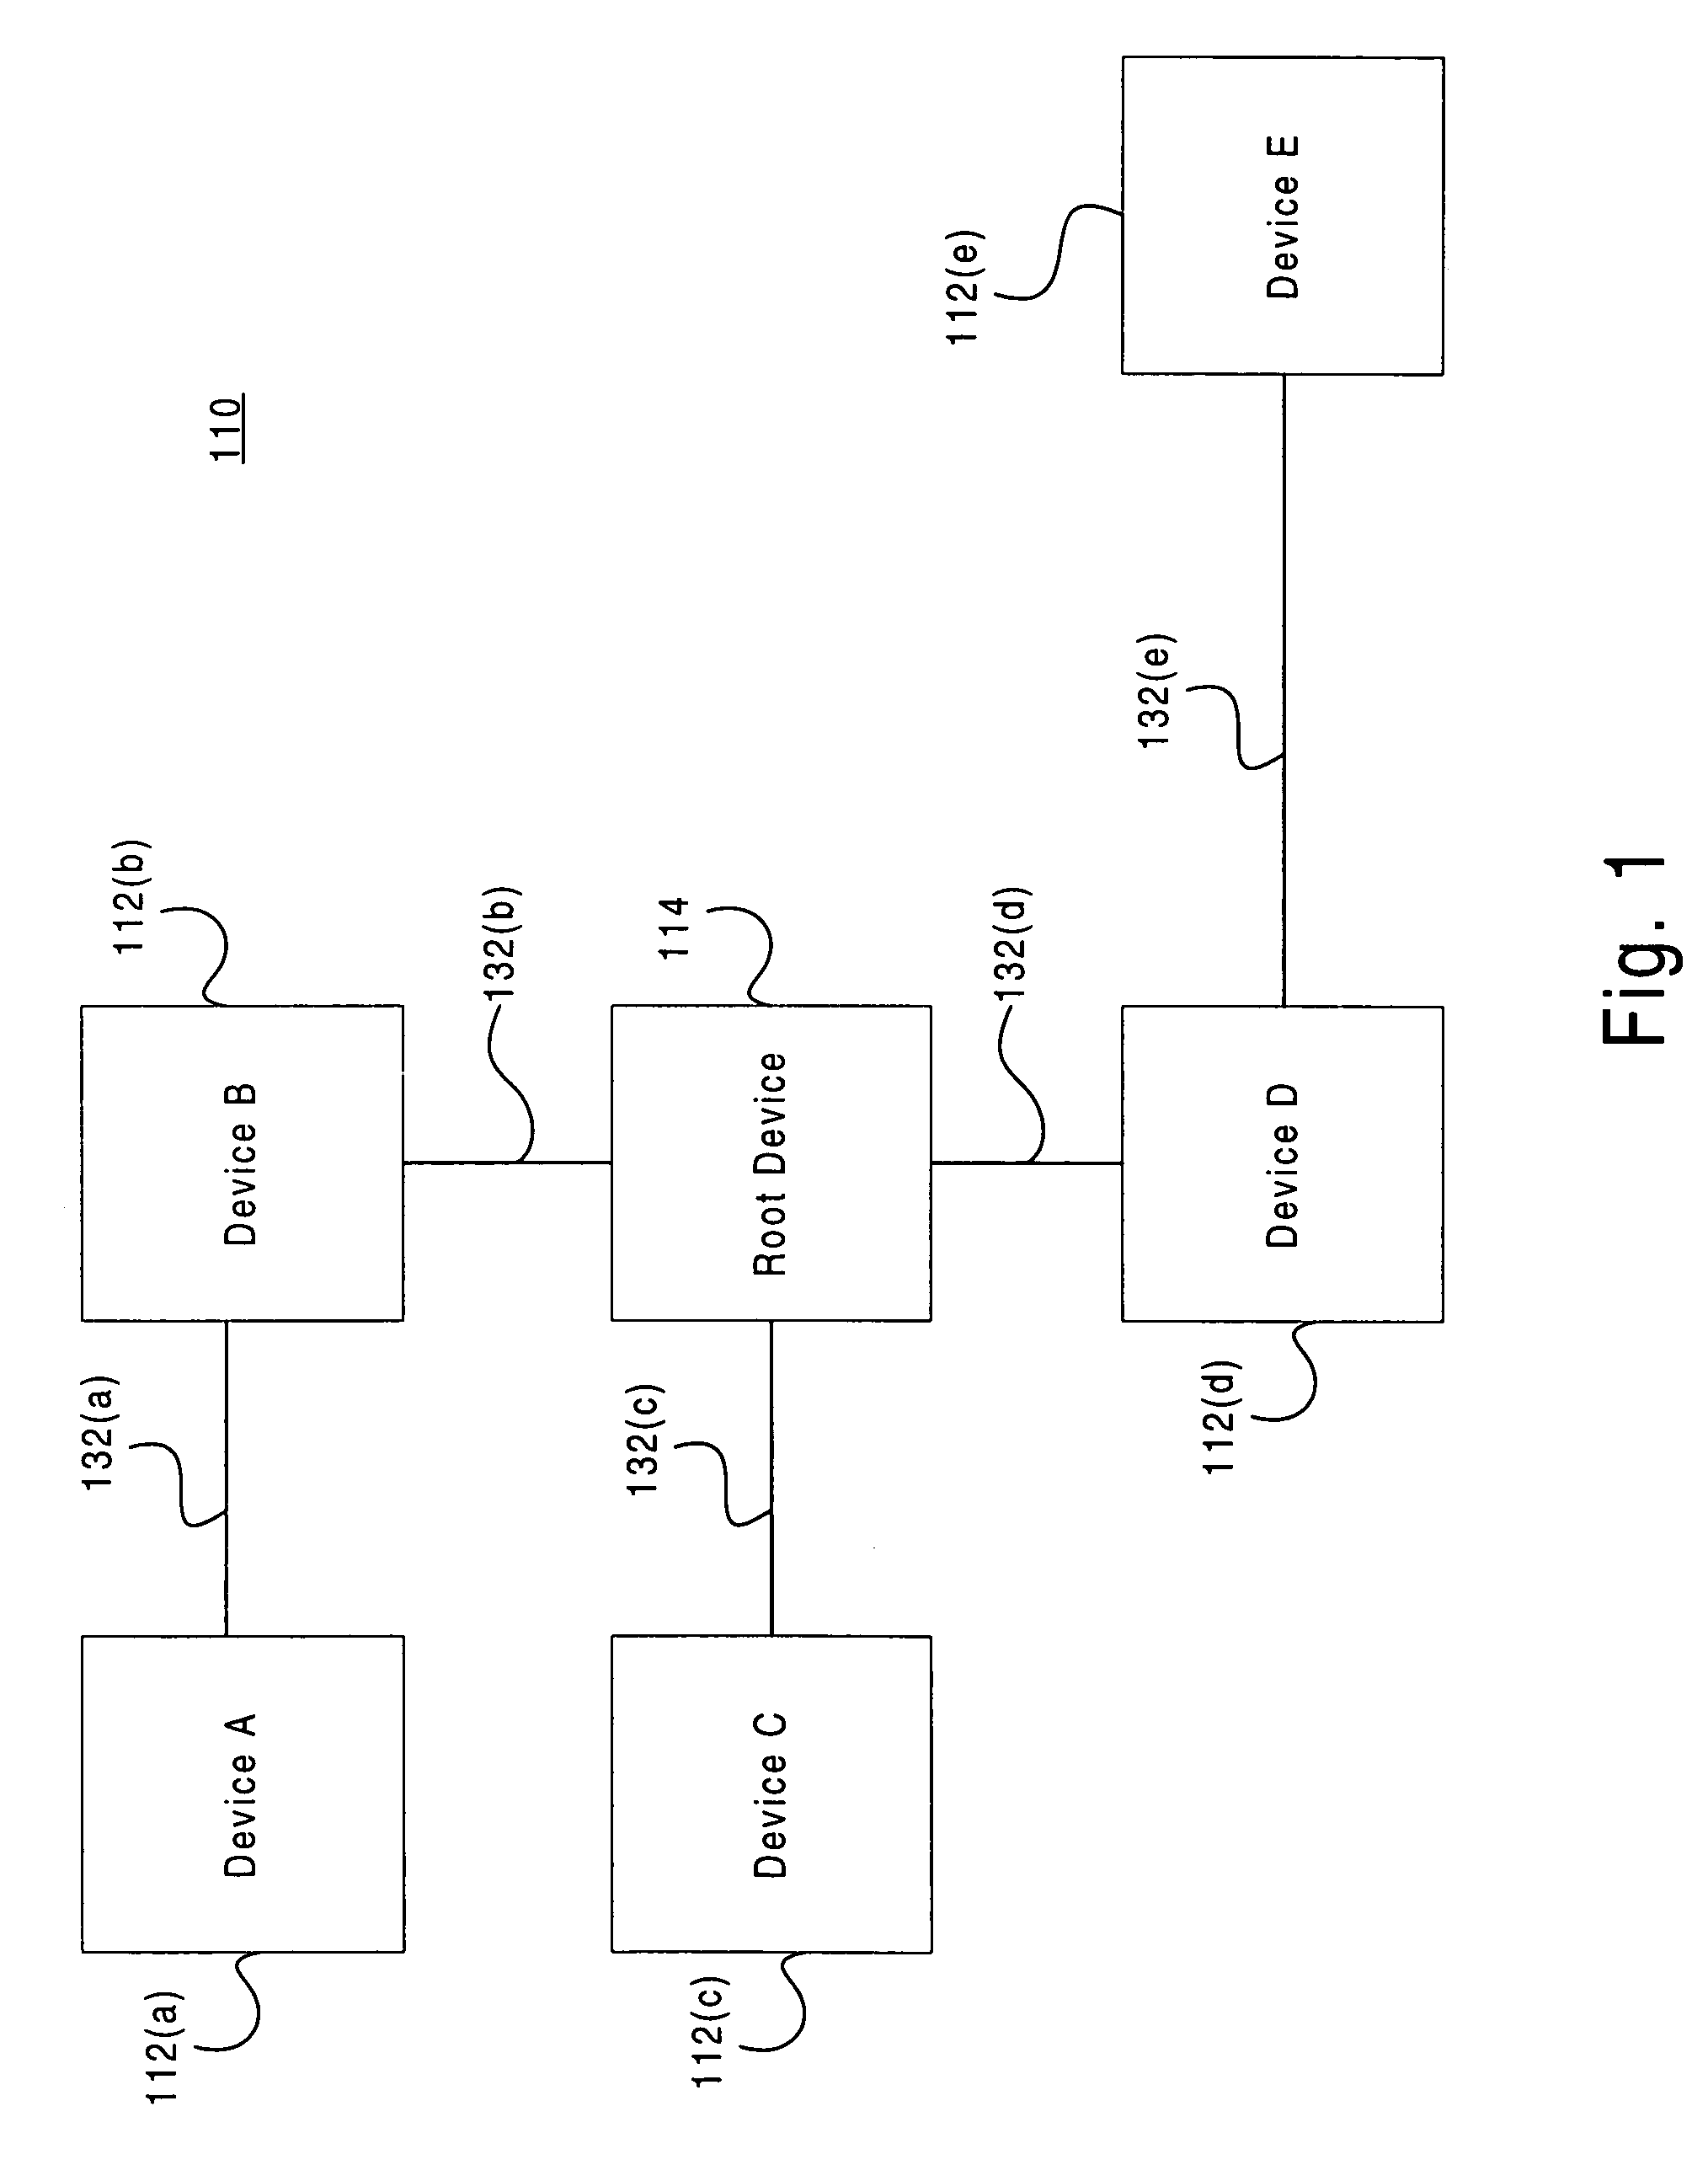 Method for utilizing resource characterizations to optimize performance in an electronic device